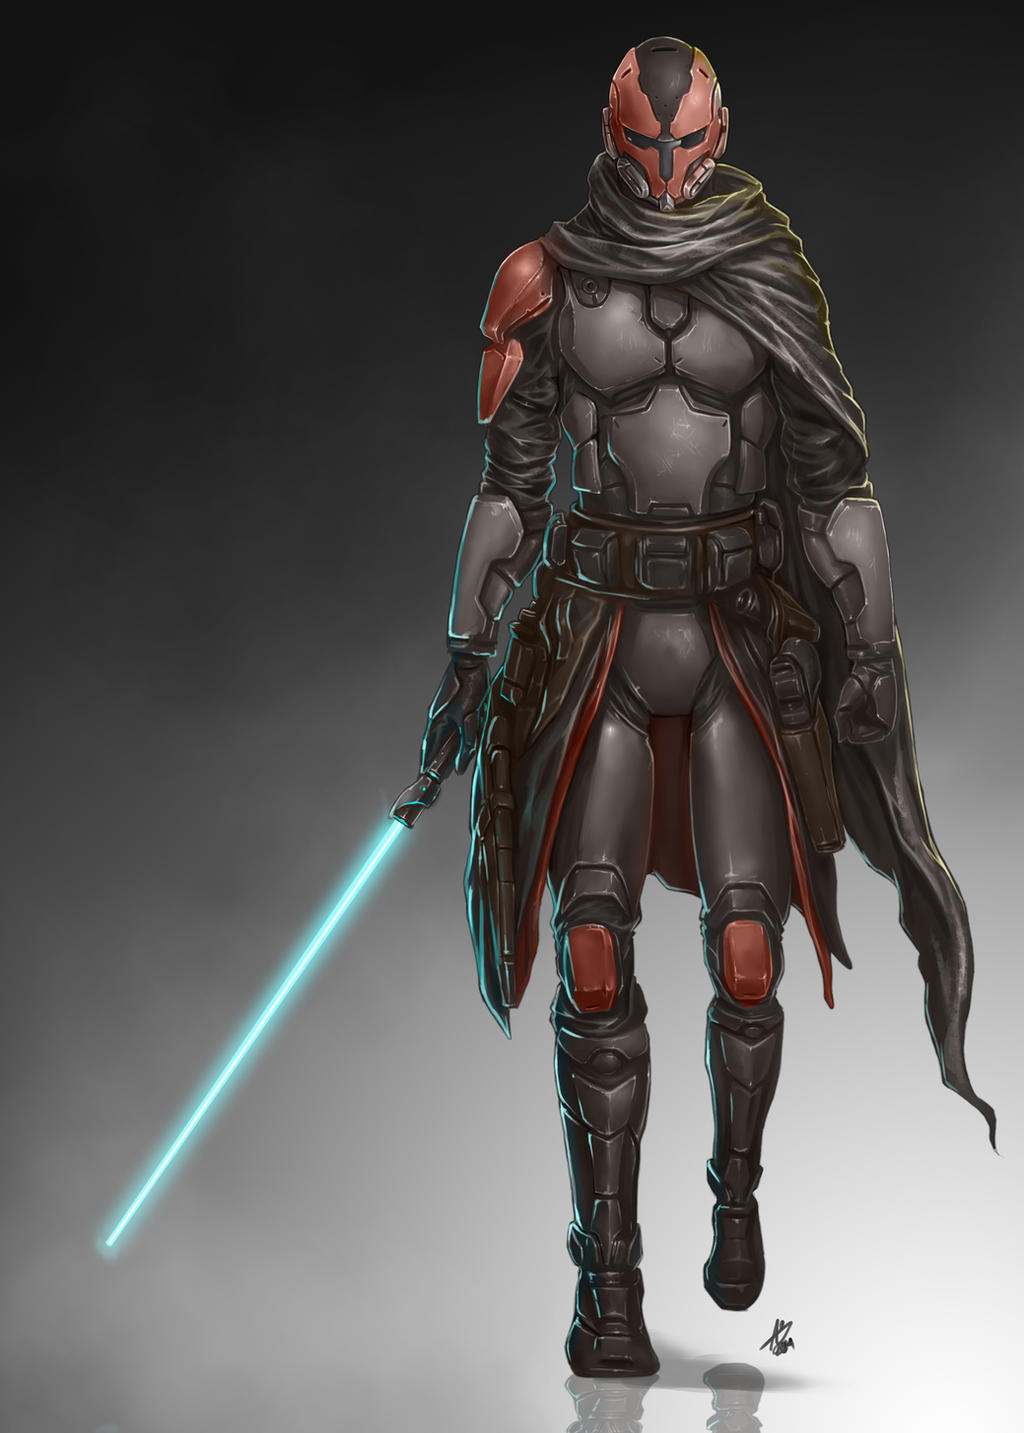 commission__mandalorian_by_aiyeahhs-d88m8gy.jpg